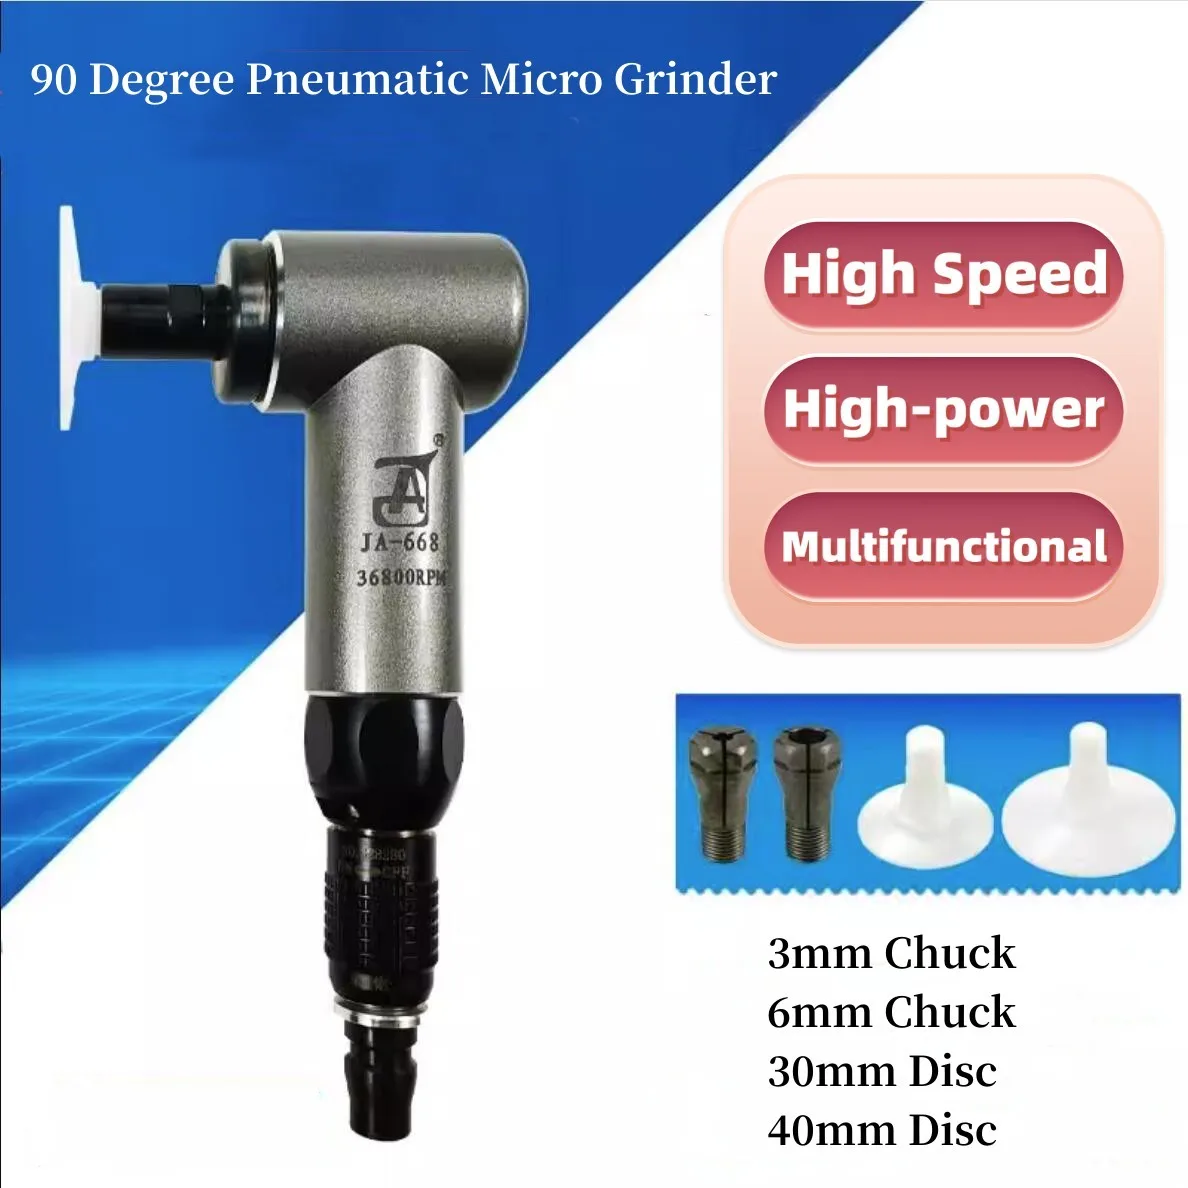 Pneumatic Air Powered Micro Grinder High Torque Angle Pencil Polisher Tool 90 Degree PLY-668 Drop Shipping